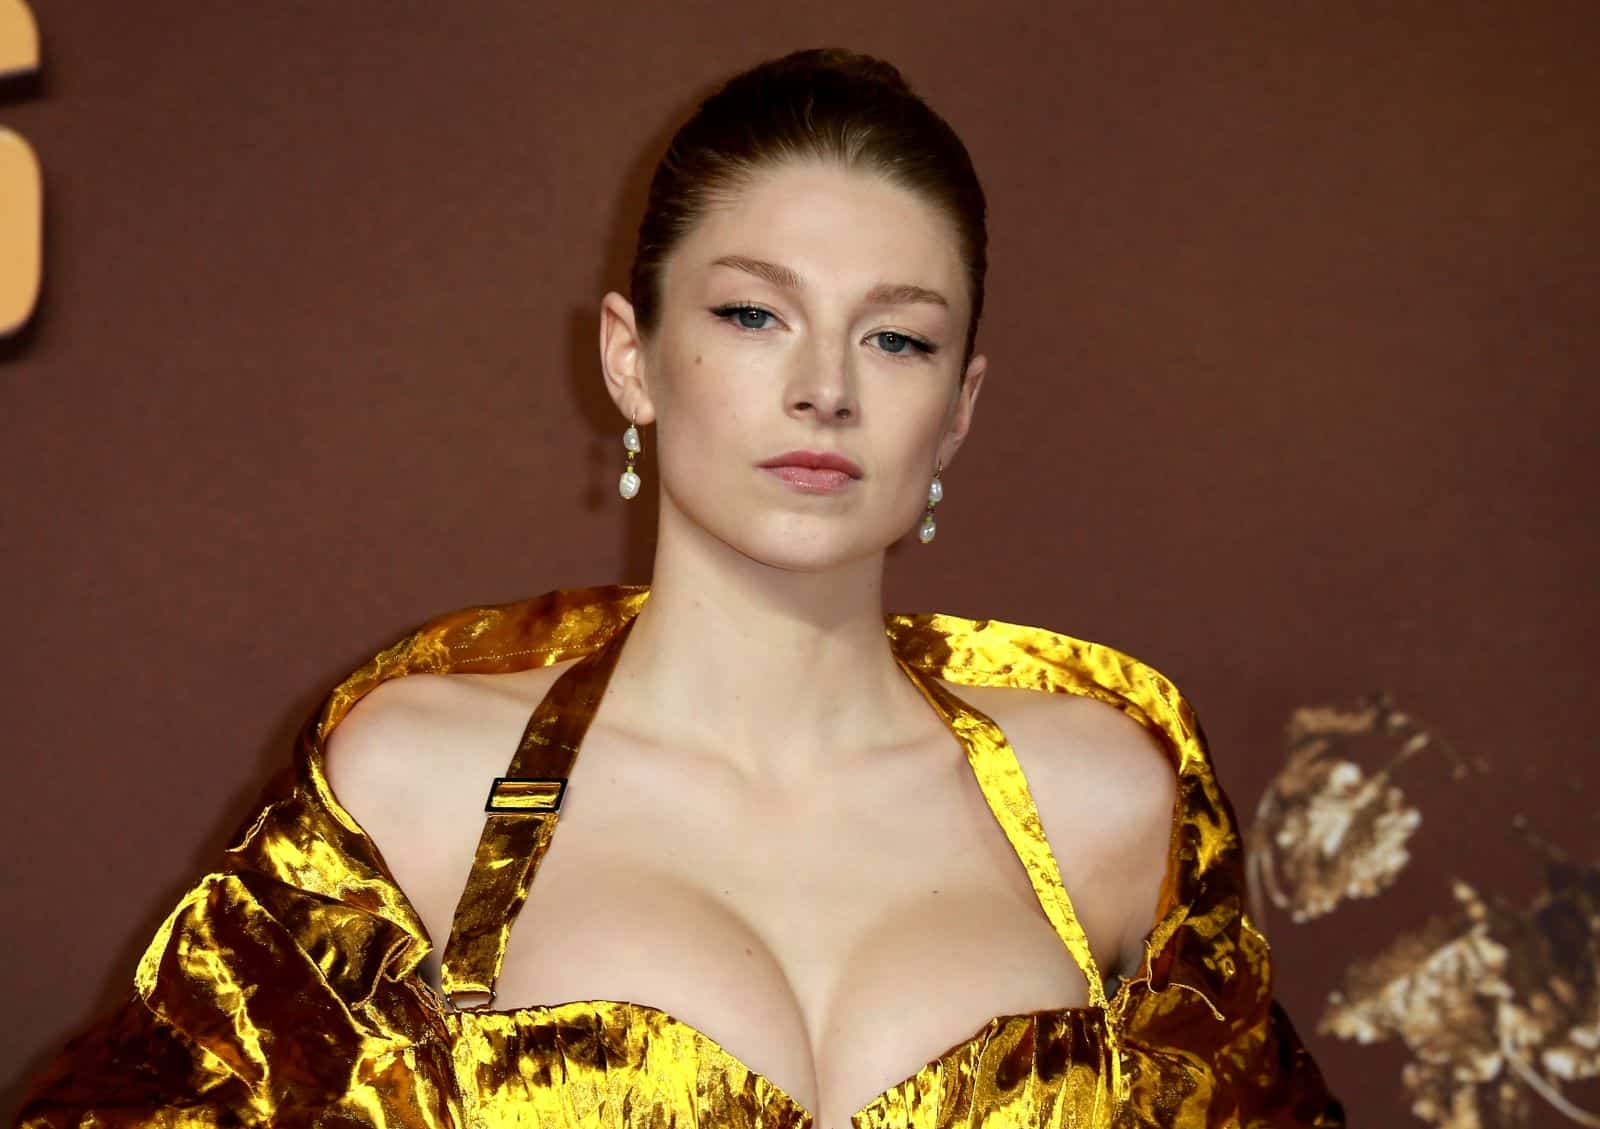 <p class="wp-caption-text">Image Credit: Shutterstock / Fred Duval</p>  <p><span>Before her acting debut in “Euphoria,” Hunter Schafer was an activist challenging bathroom bills in North Carolina. Schafer’s role as Jules has been praised for its nuanced depiction of a transgender teen’s life. Despite facing personal and public challenges, she continues to inspire and advocate for transgender youth.</span></p>